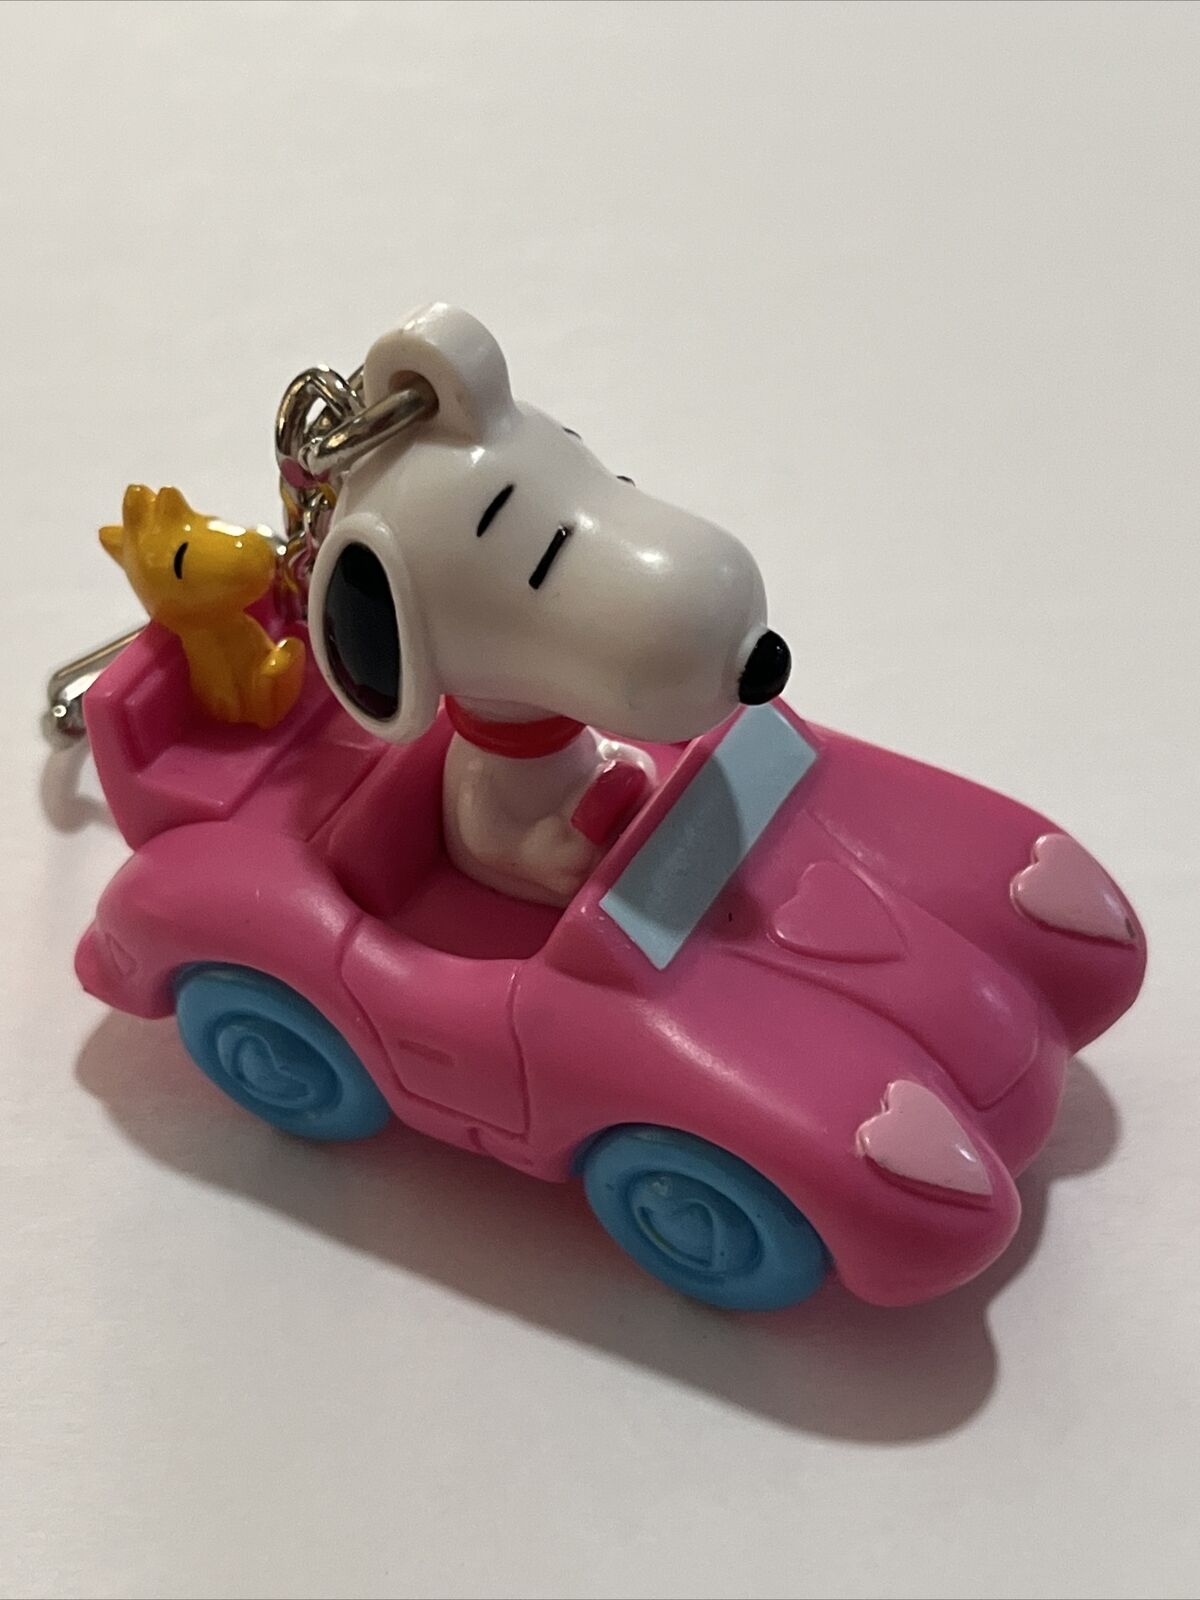 Snoopy & Woodstock Driving Heart Car Keychain 2.5” - Peanuts Vintage Collectible